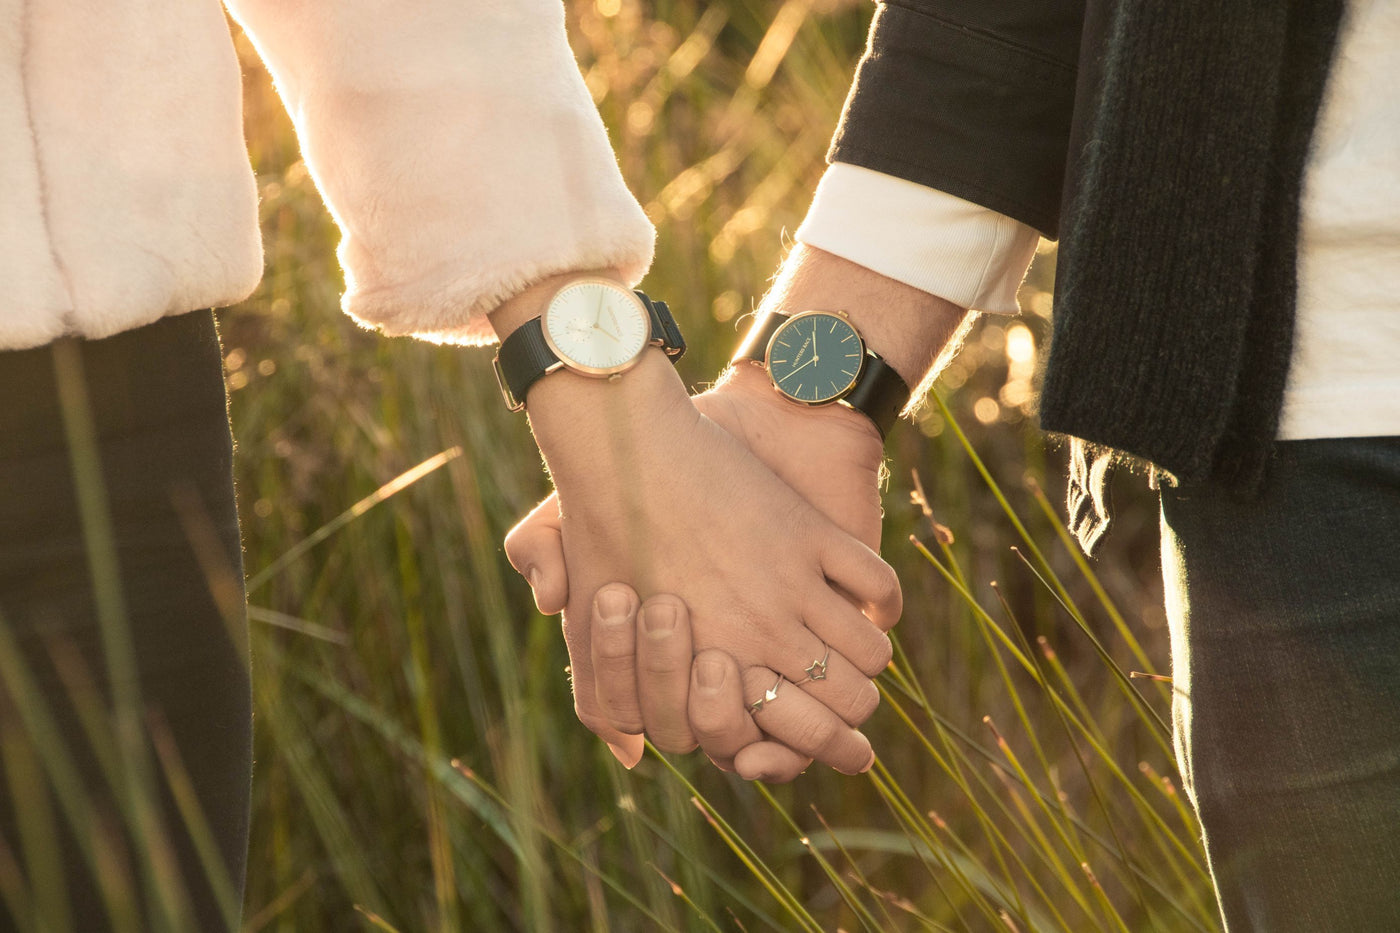 Man and woman holding hands wearing new watches